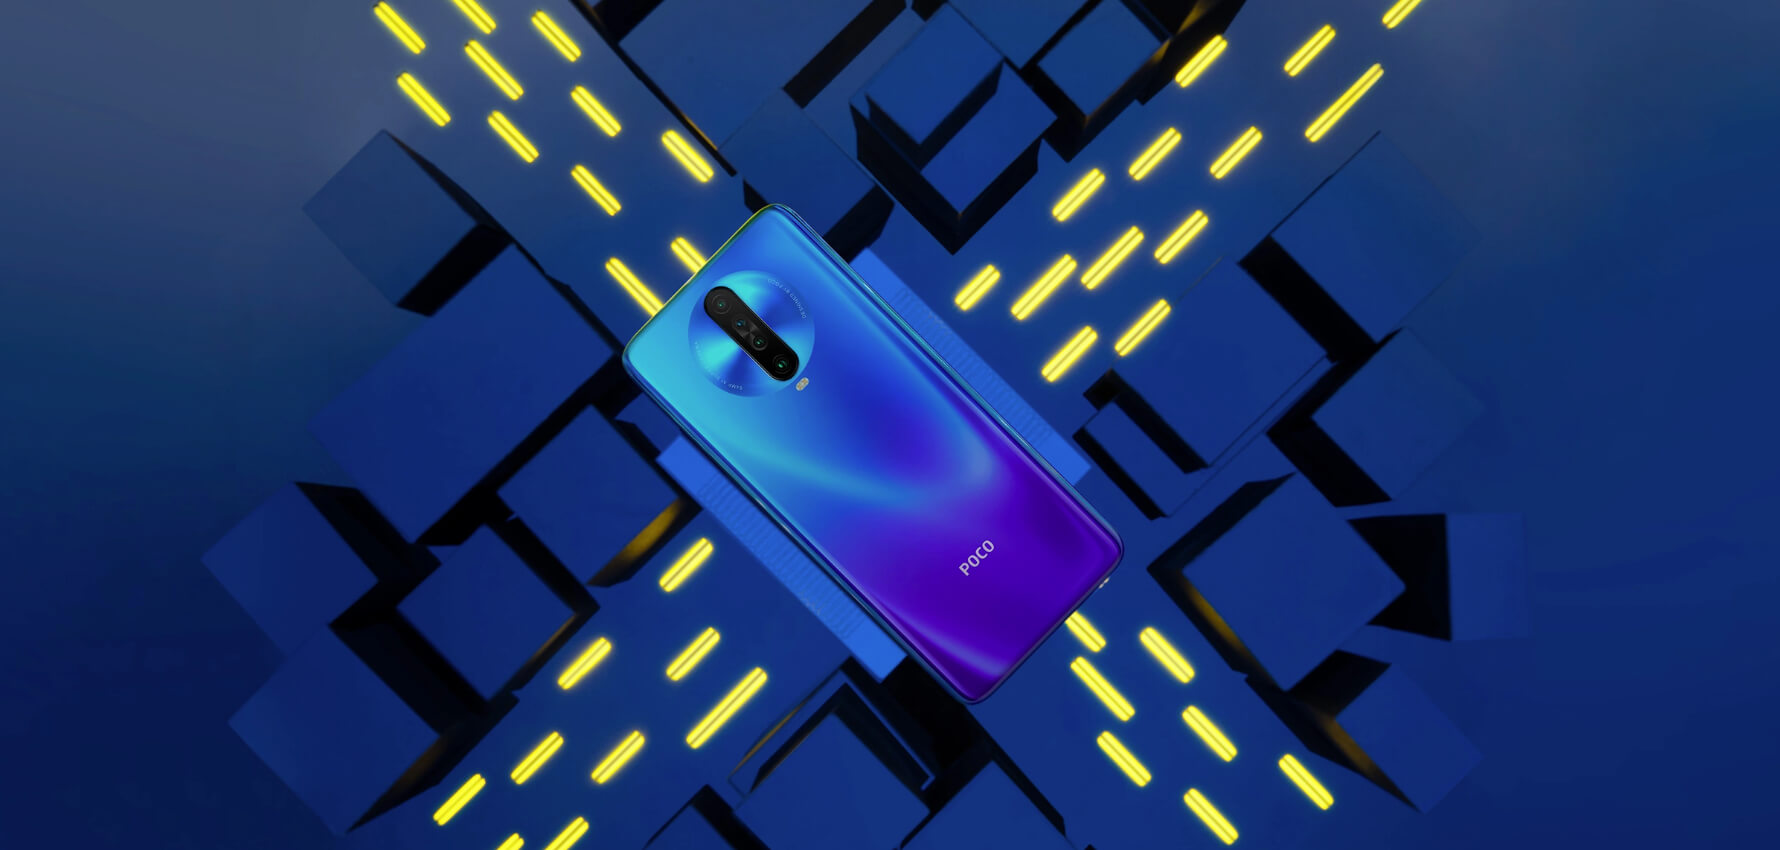 Poco X2 Full Specifications and Details